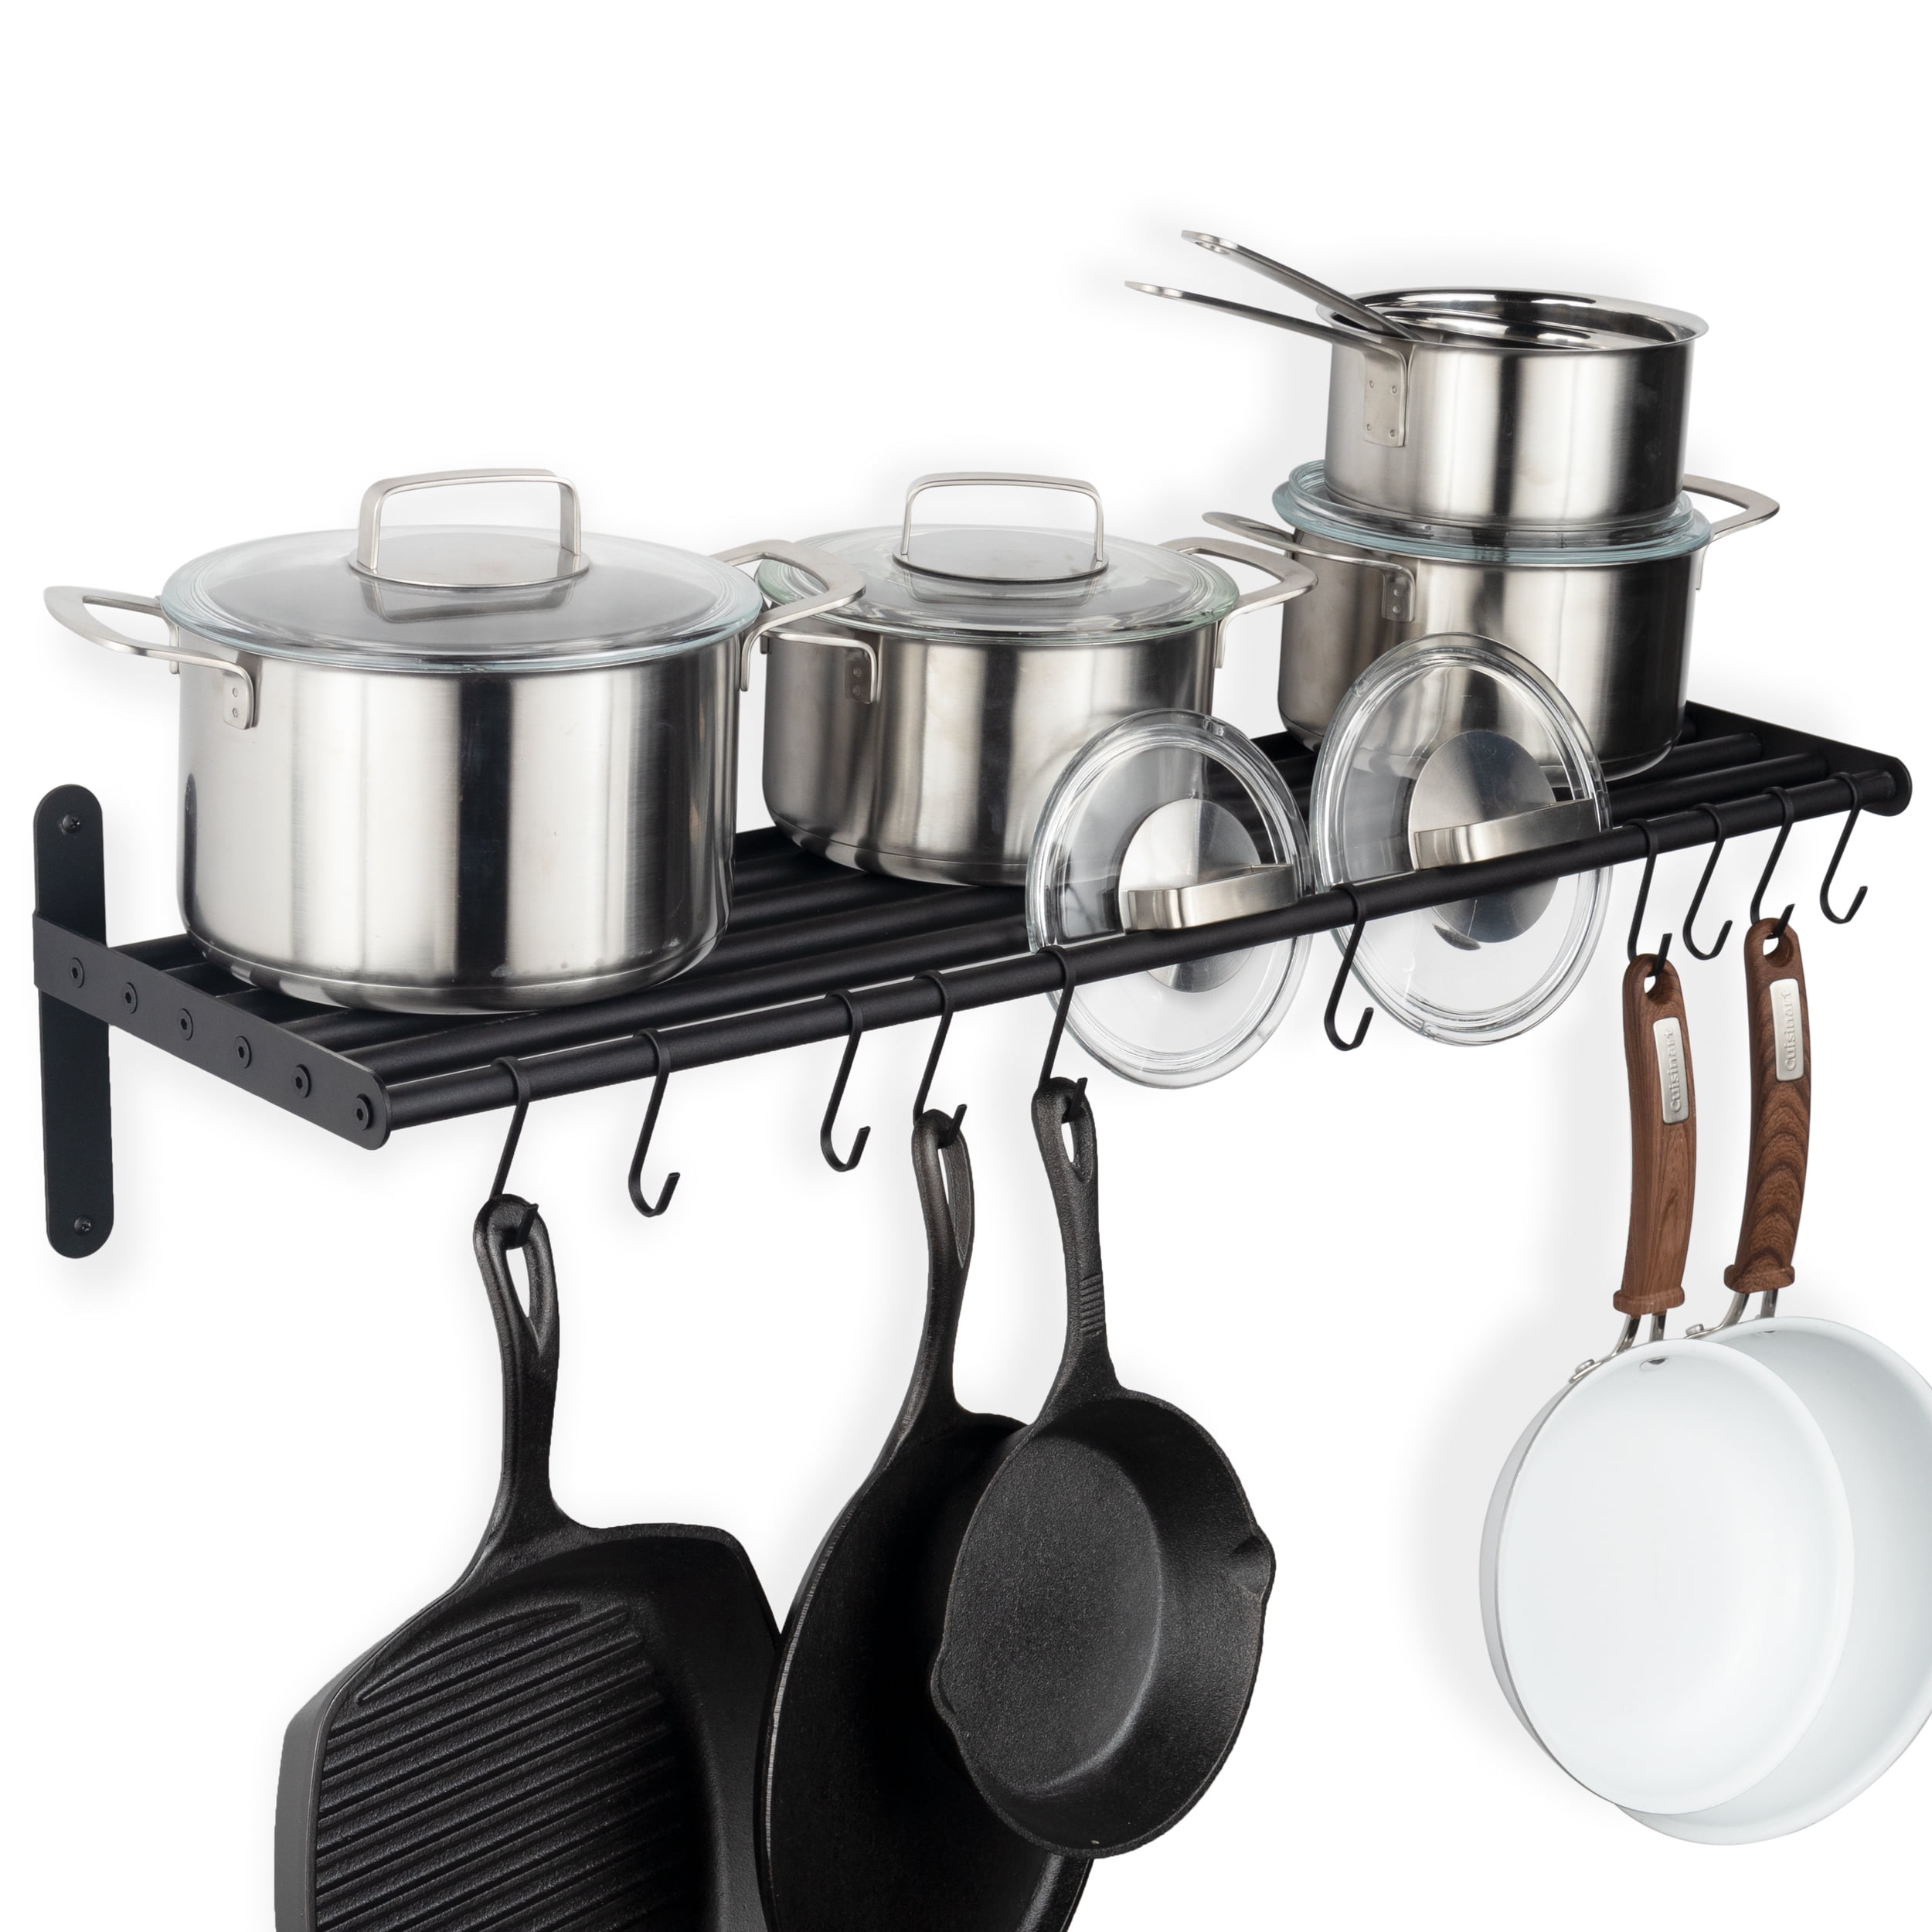 Kitchen Wall Pot Pan Rack,With 6 Hooks suitable for Juicer or Coffeemaker Mecete 304 Stainless Steel Standard Wall Shelf Capacity 200 lb Cookware Storage Organizer 23.5 x 9.5